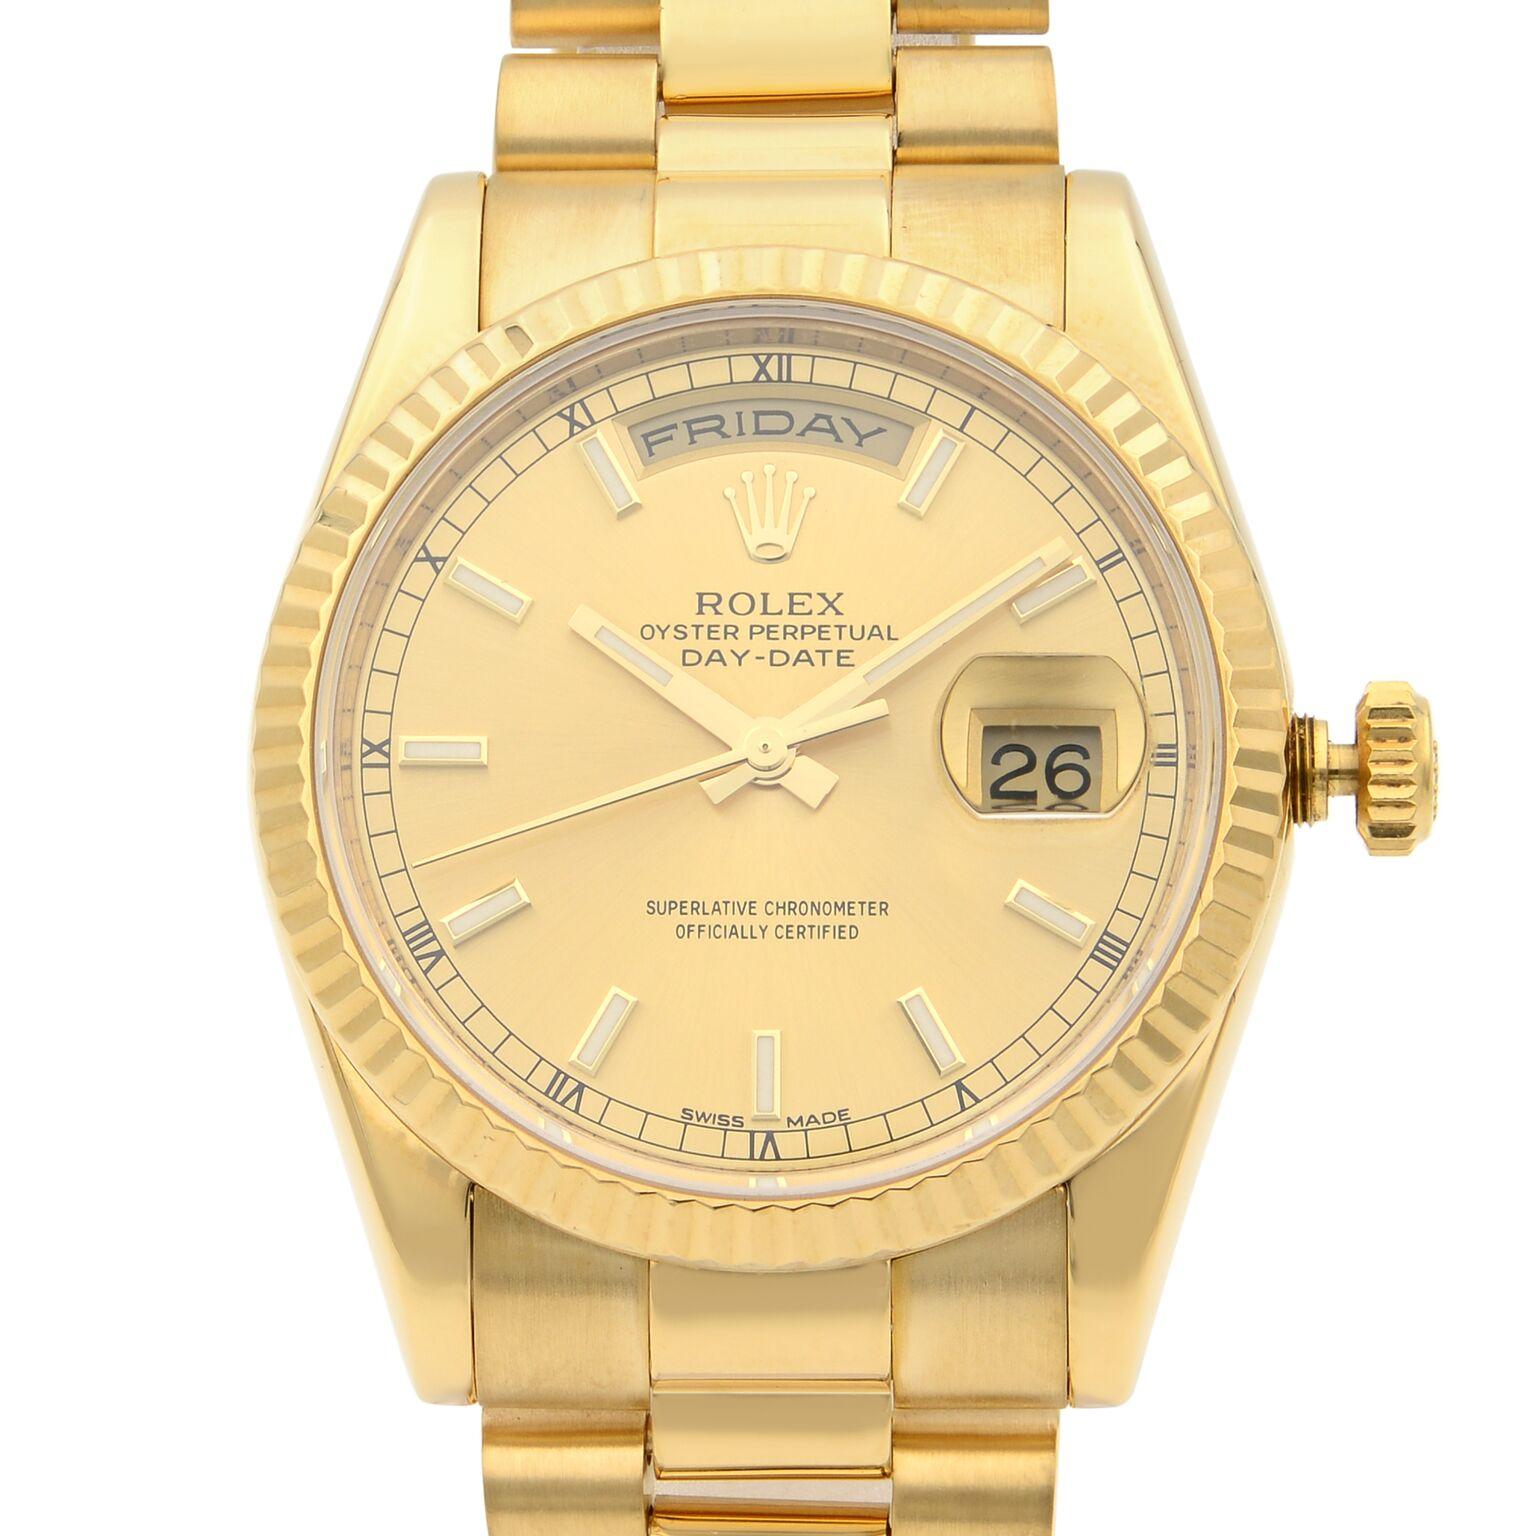 This pre-owned Rolex Day-Date 118238 is a beautiful men's timepiece that is powered by a mechanical (automatic) movement which is cased in a yellow gold case. It has a round shape face, day & date dial, and has hand sticks style markers. It is